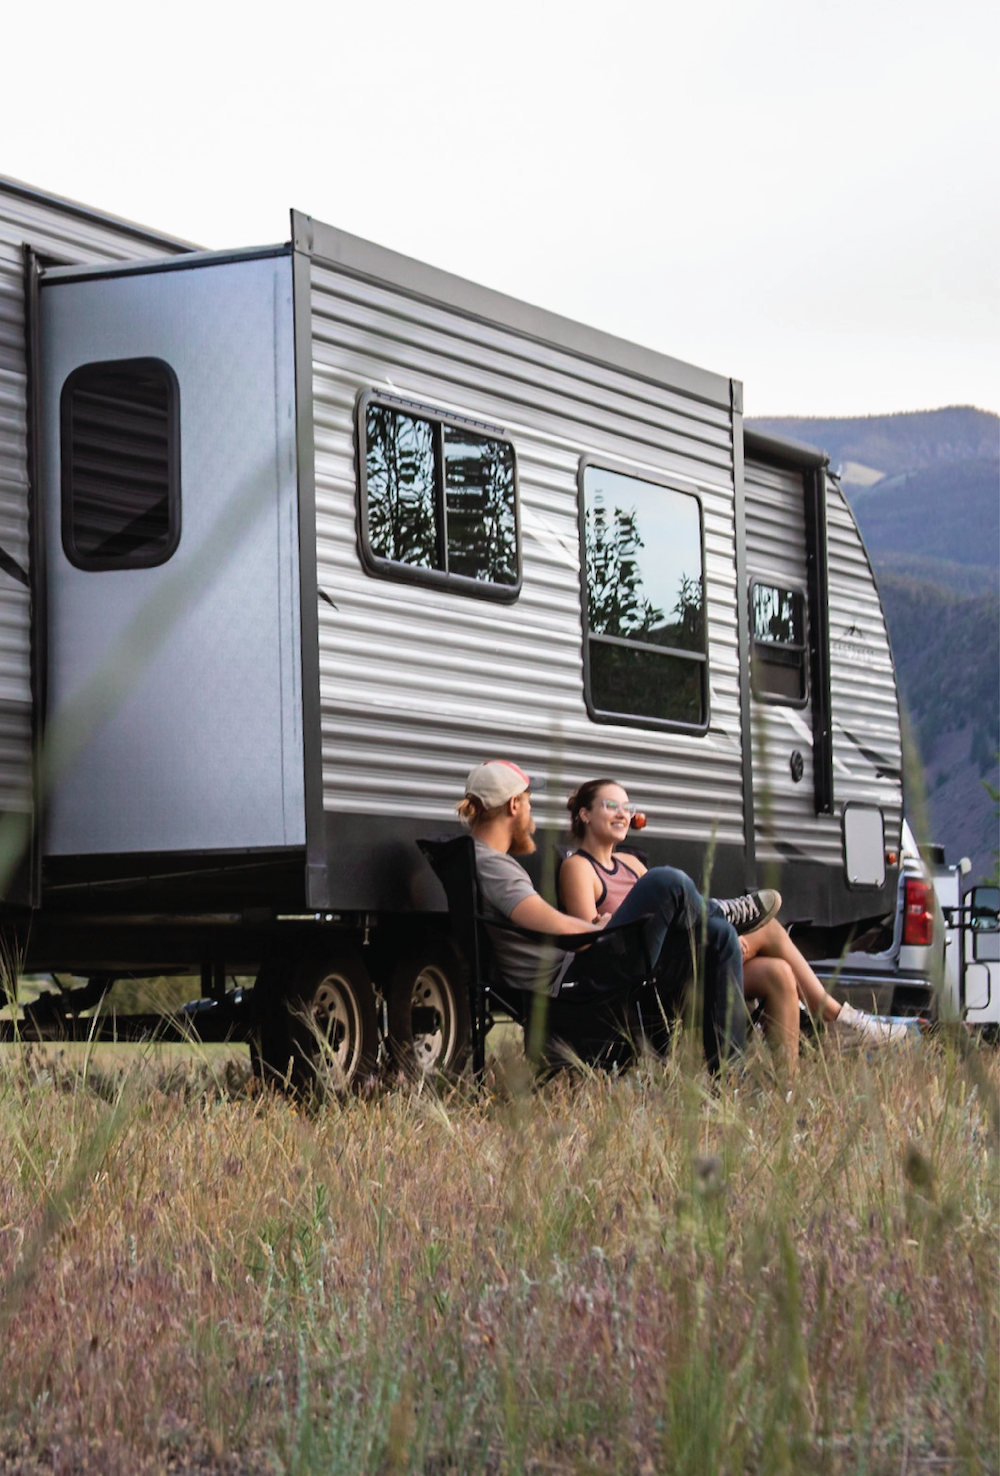 Things we learned from our 4 years of living in an RV